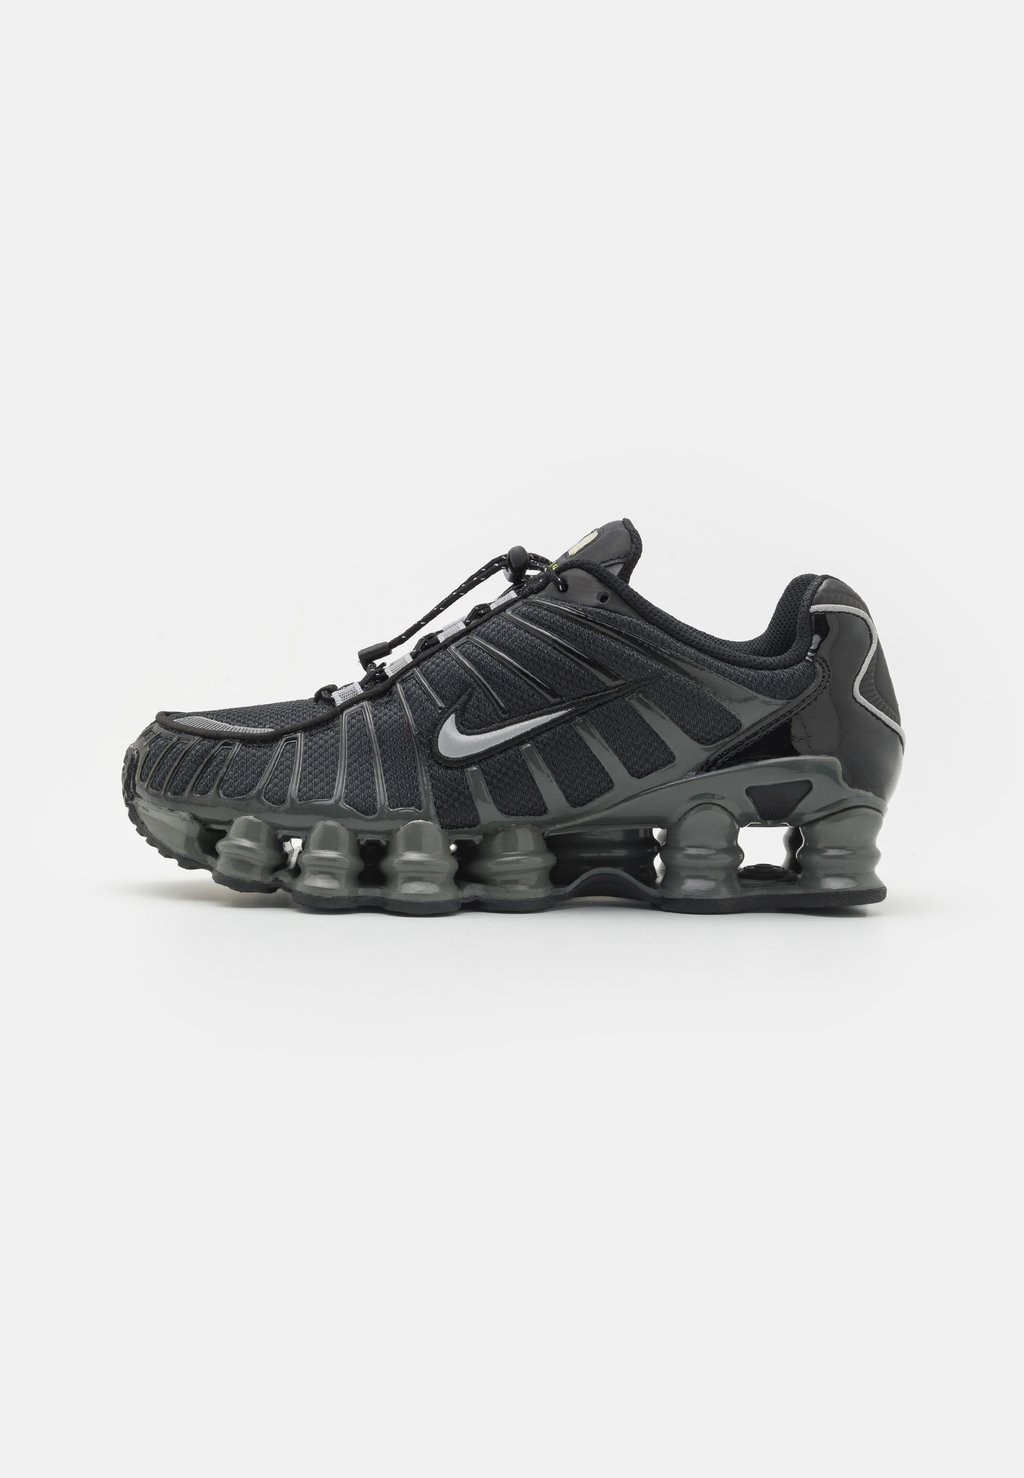 Кроссовки Nike SHOX, цвет black/metalic silver/anthracite/high voltage taidacent 6 80v high voltage dc relay 30a detection control delay switch voltage controller over under voltage relays dc